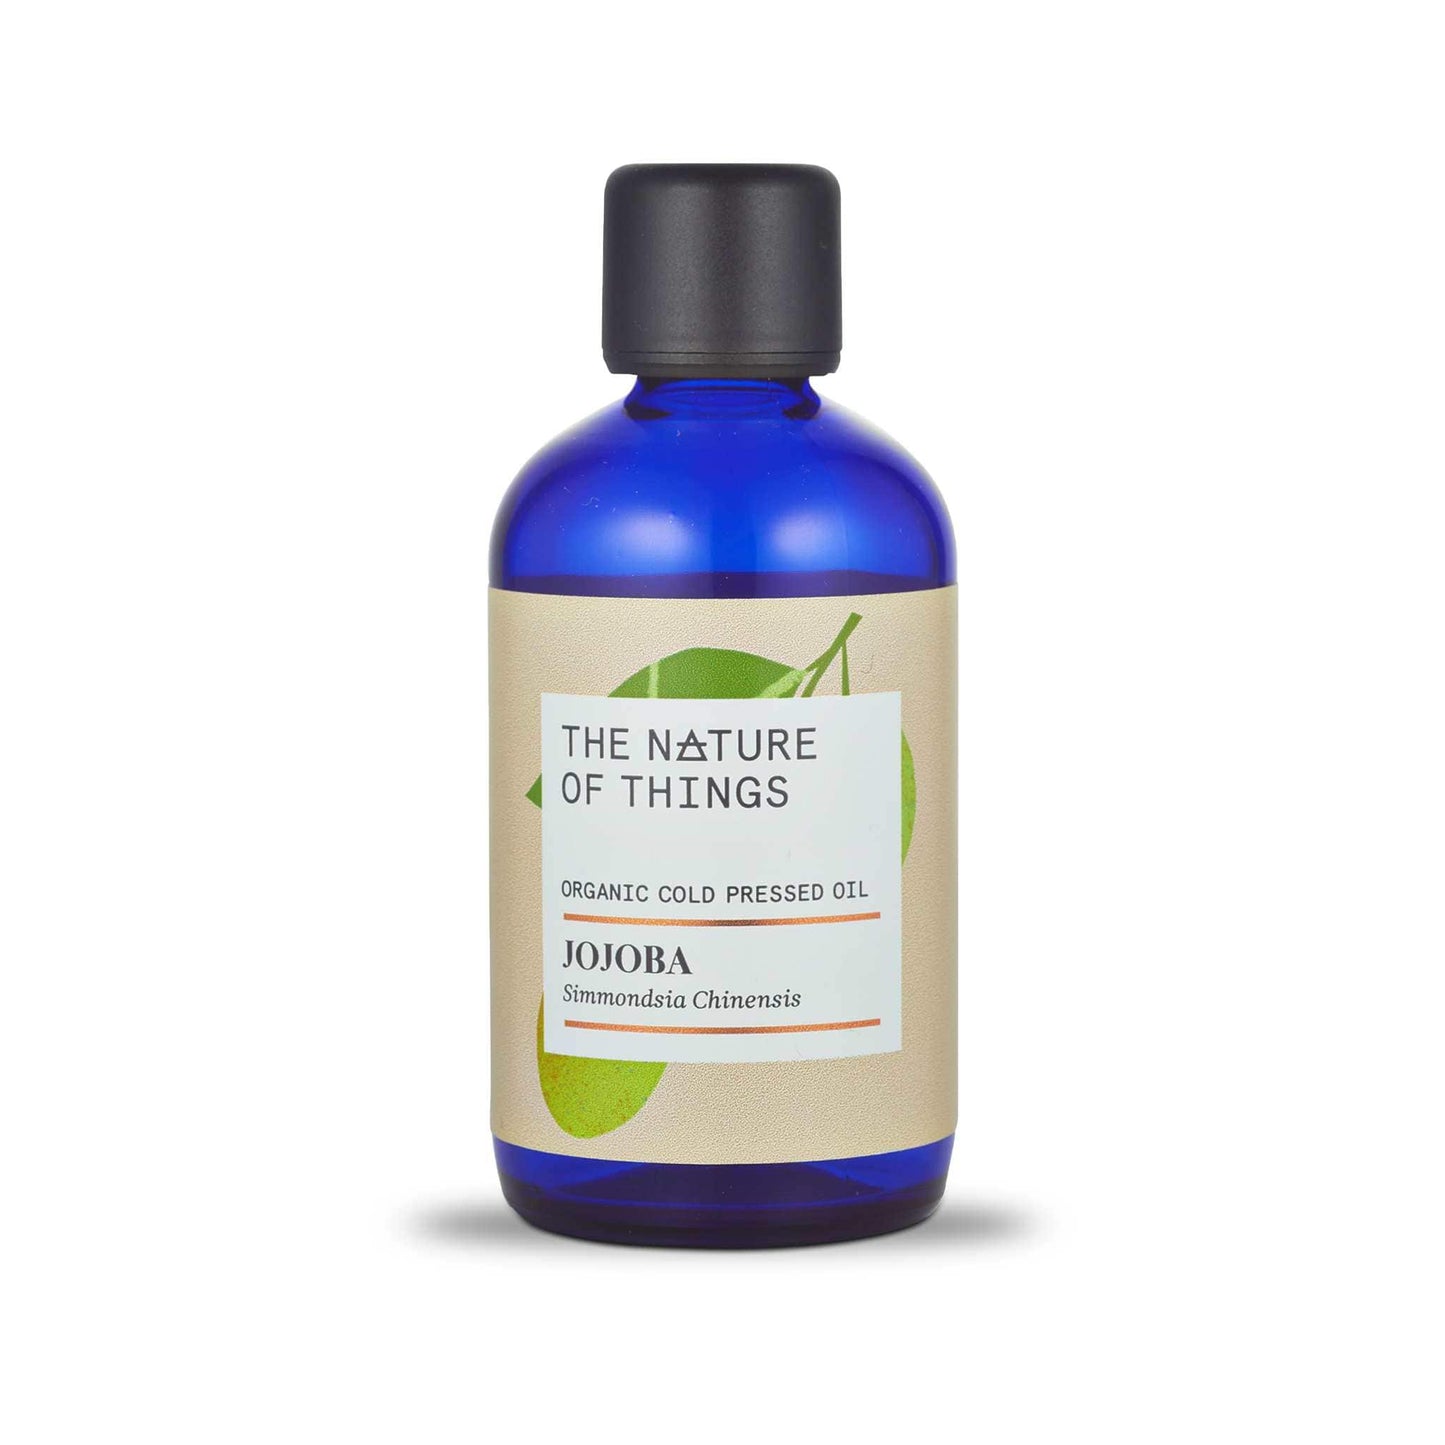 The Nature of Things Essential Oil Jojoba Oil (Organic) 100ml - The Nature of Things